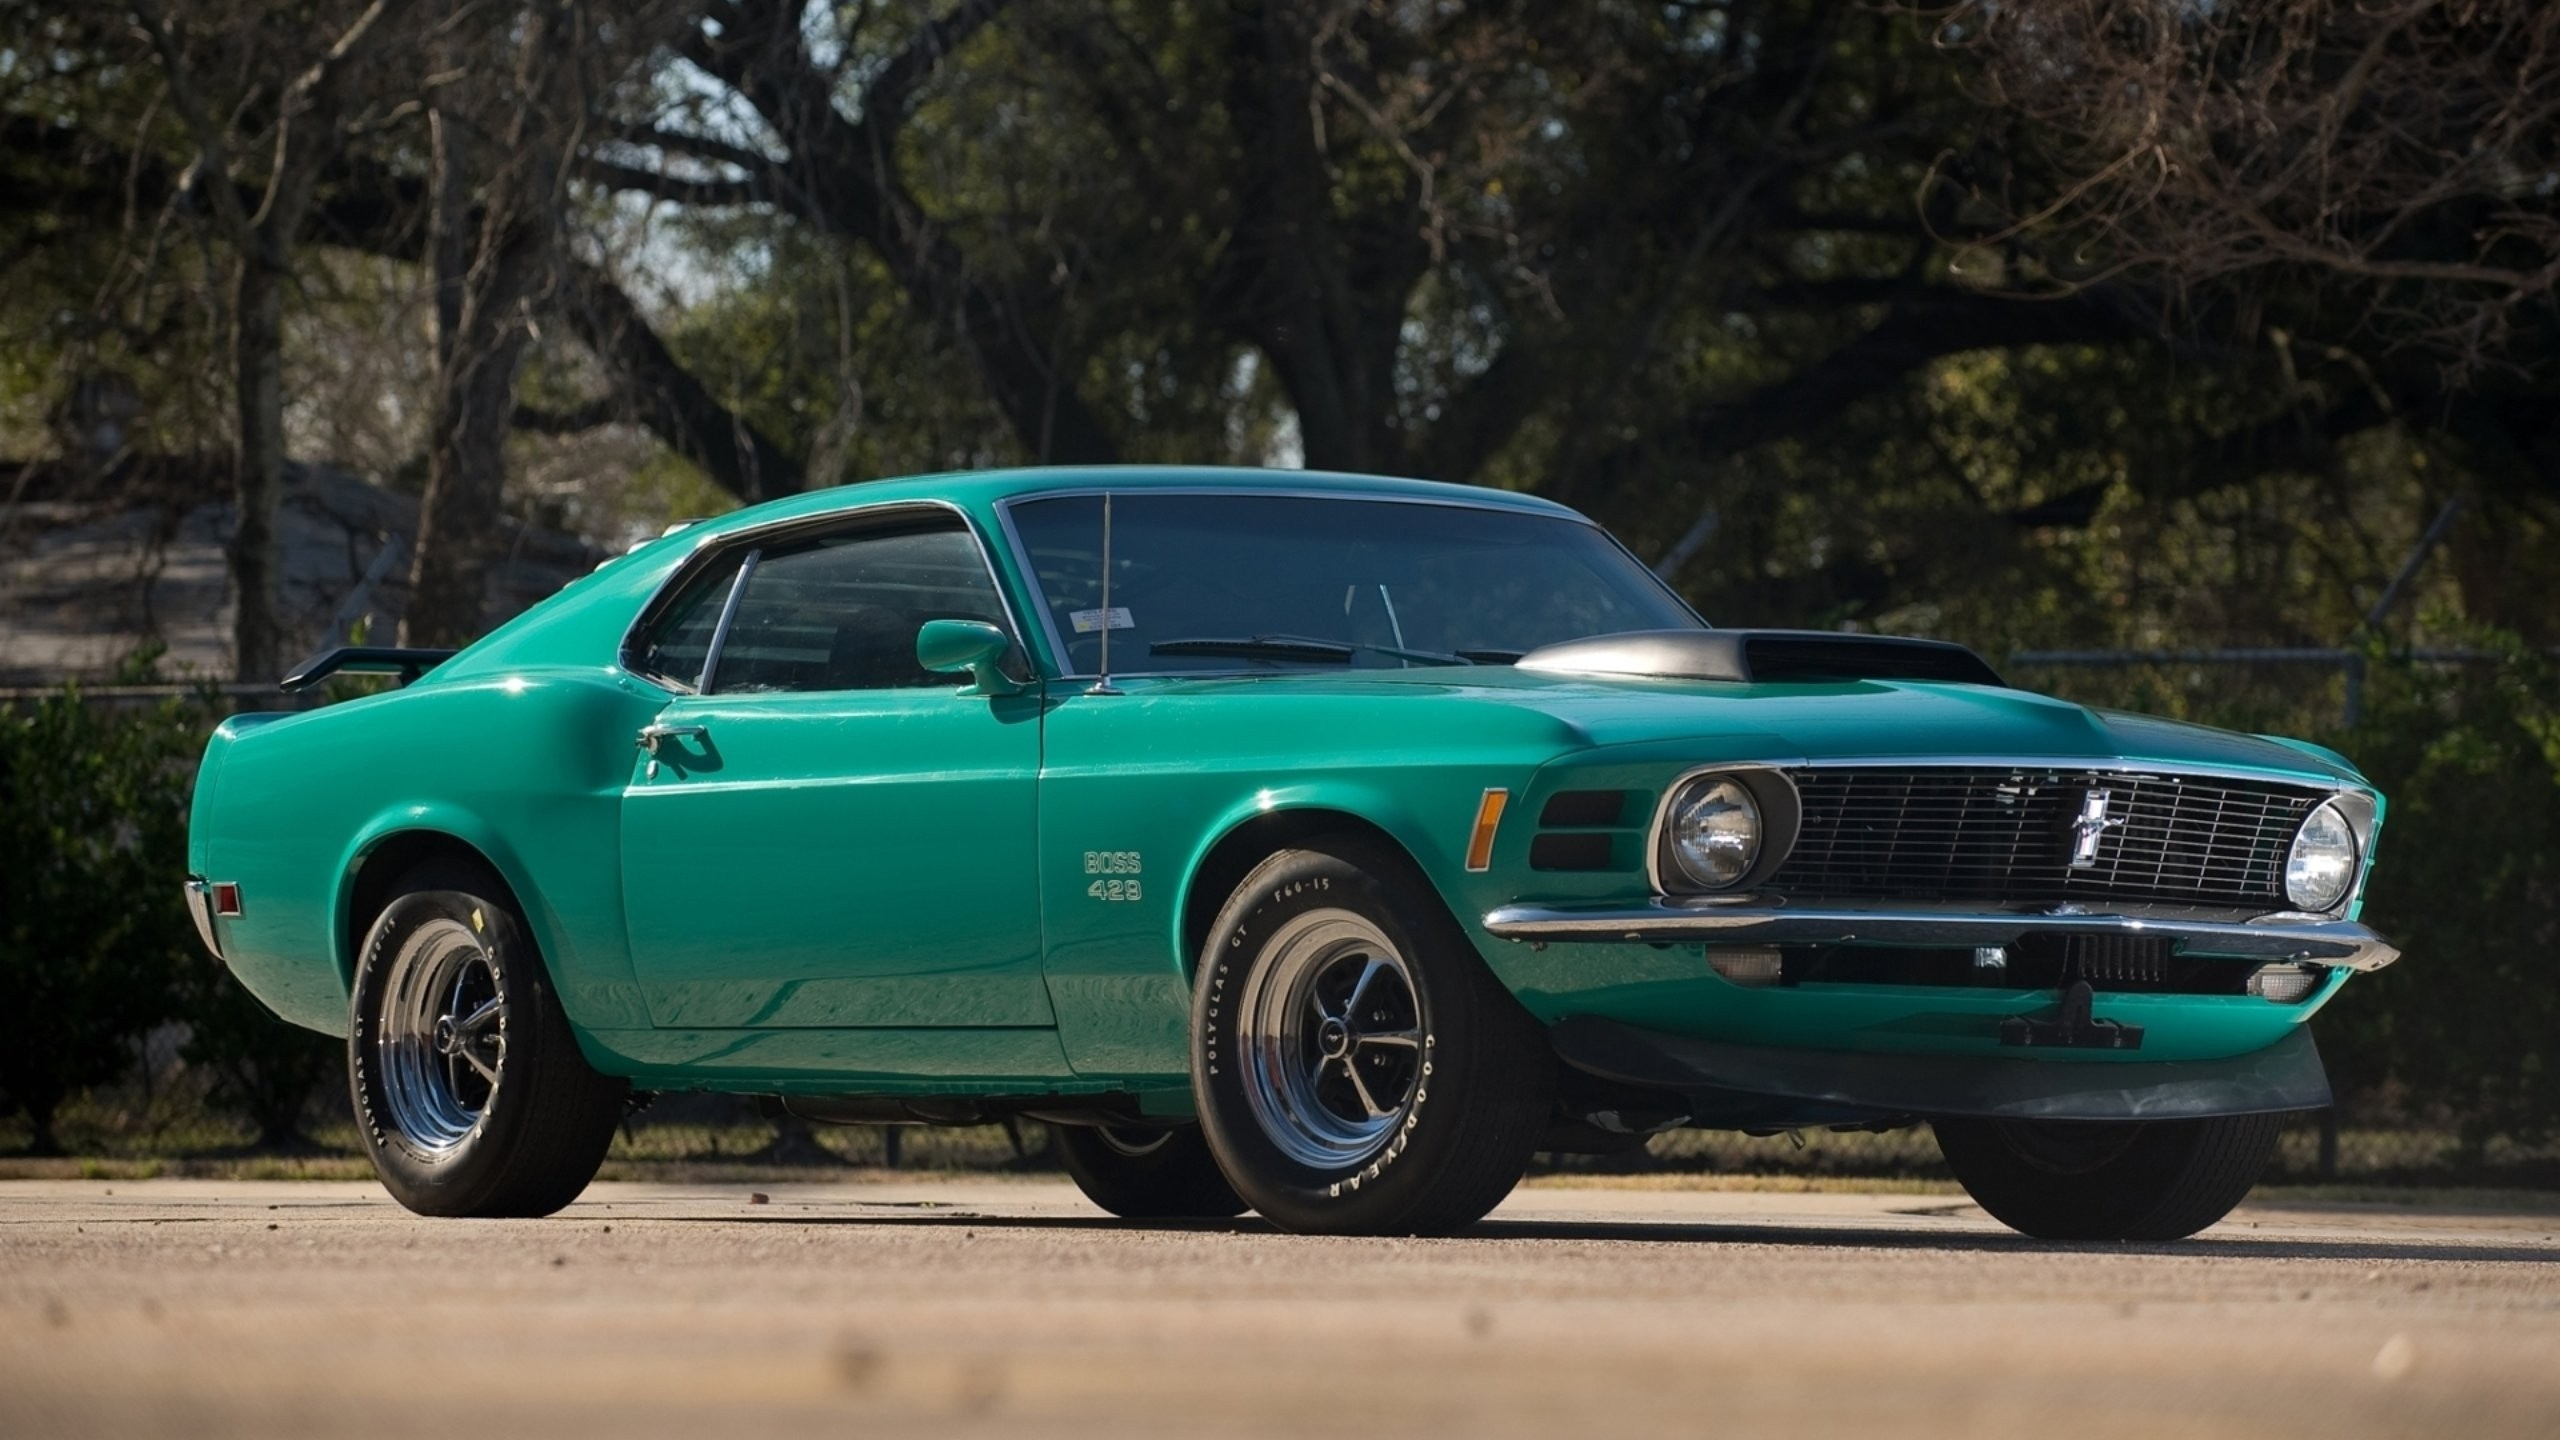 Green Chevrolet Camaro on Road During Daytime. Wallpaper in 2560x1440 Resolution